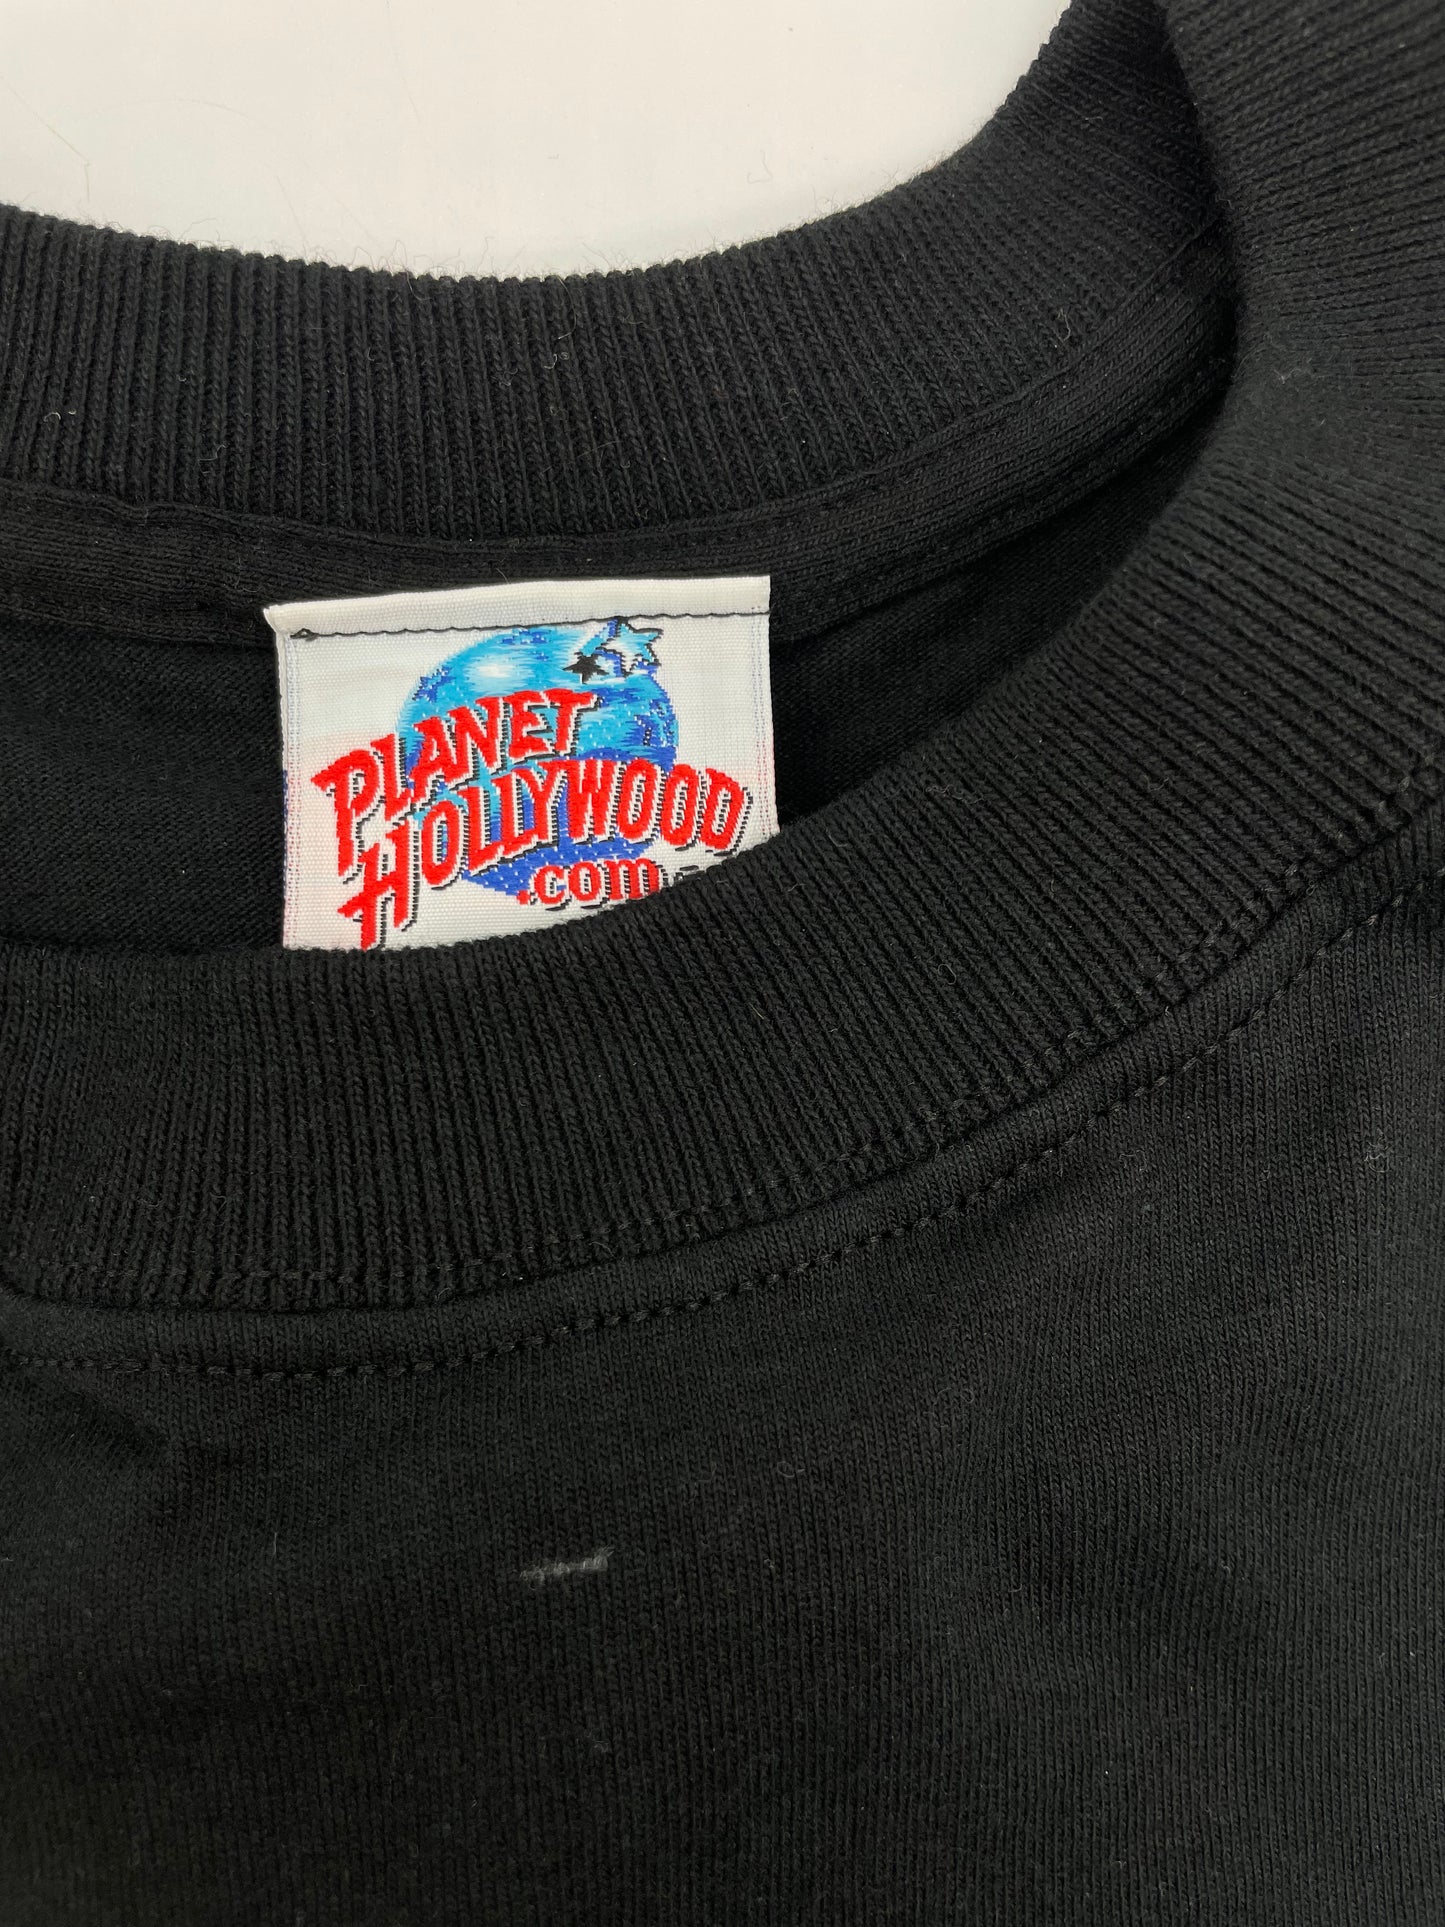 T-shirt Planet Hollywood 1990s